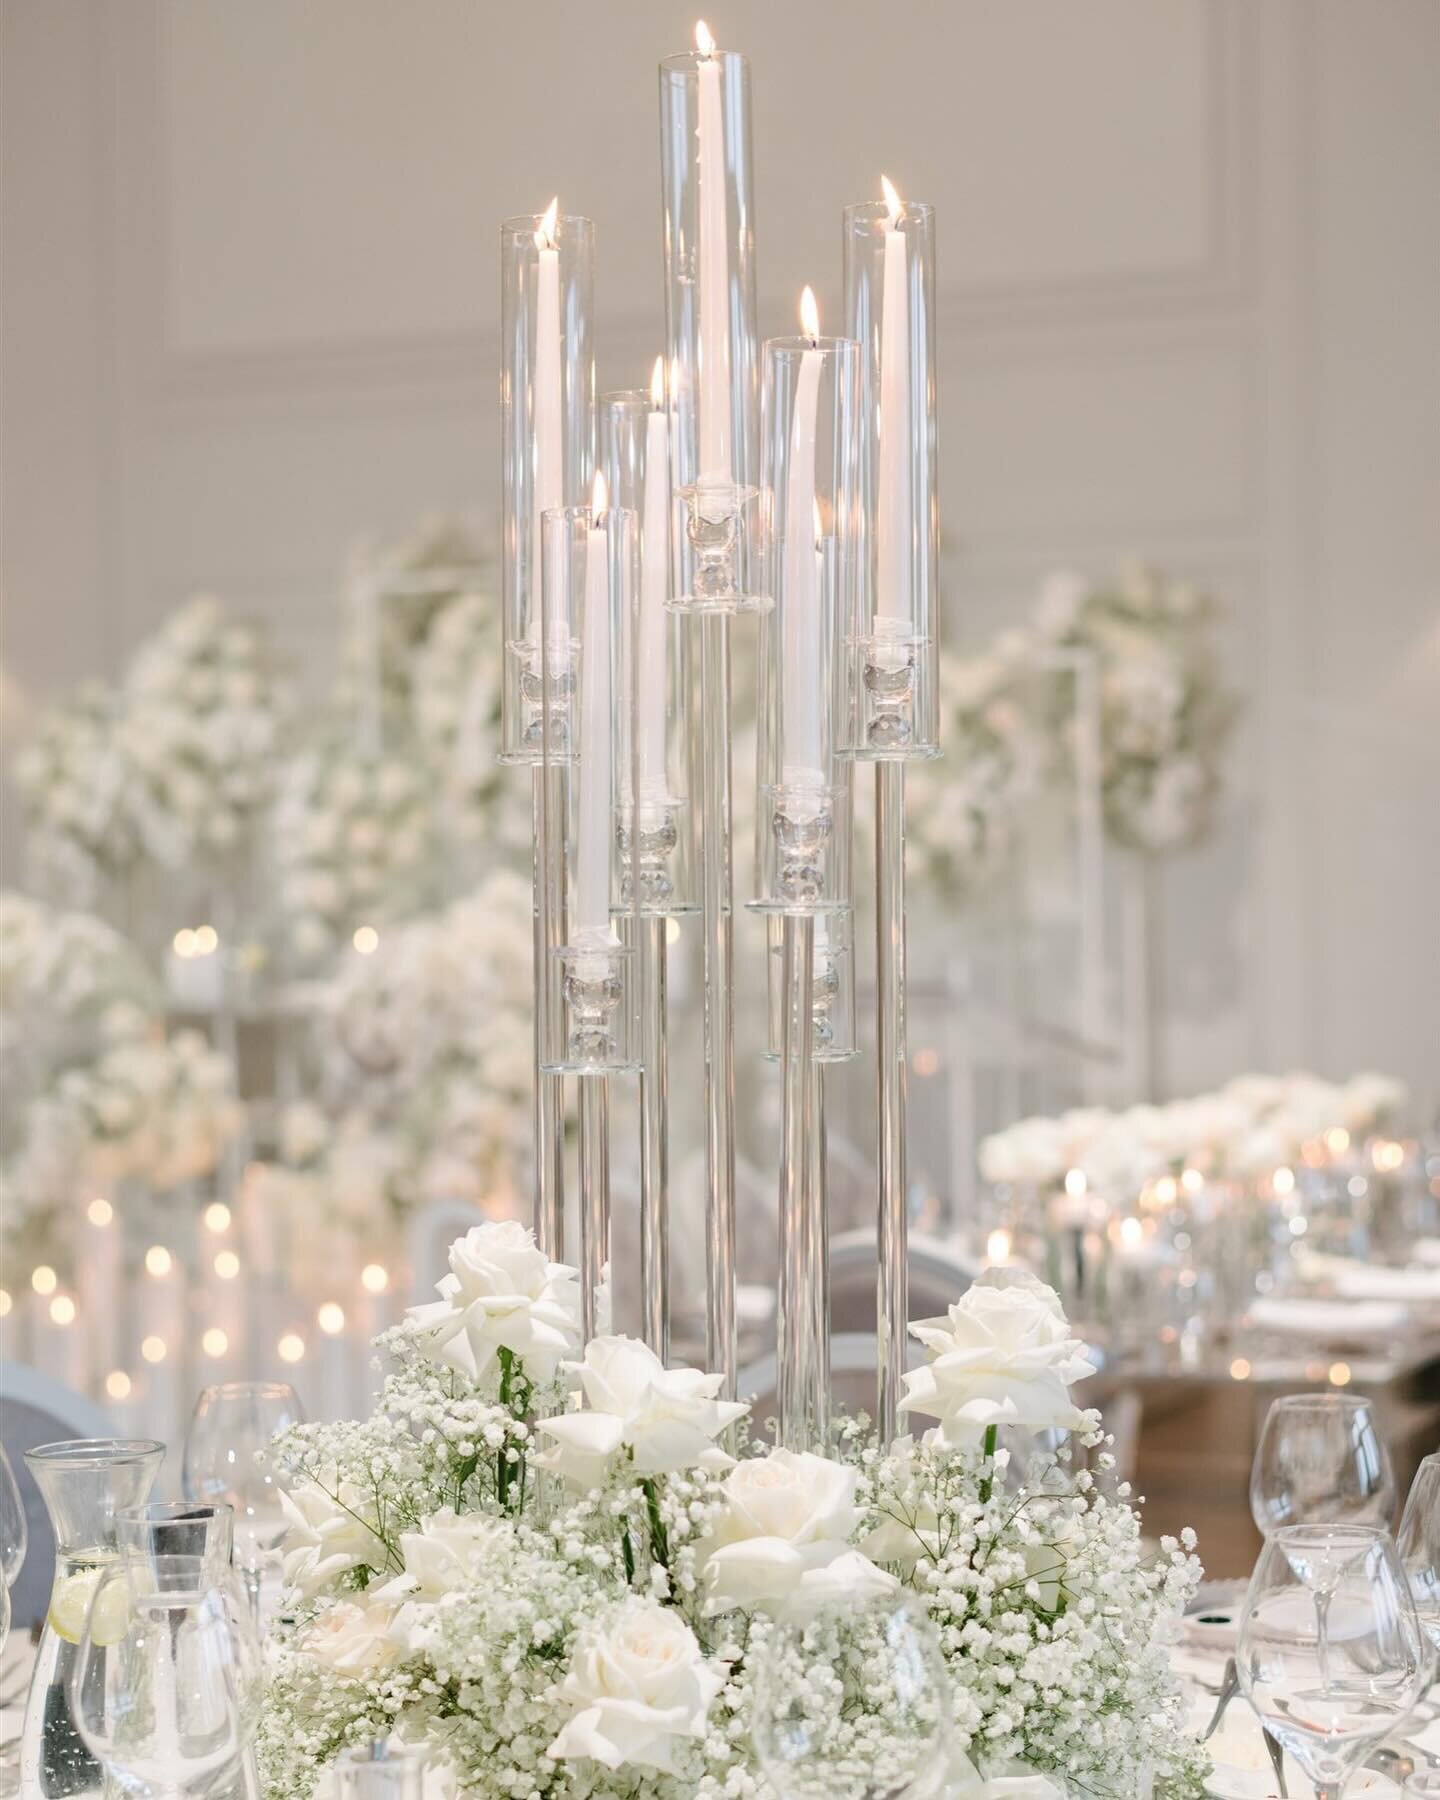 ✨ Amidst blooms and flickering candles, love blooms brightest! 🌸✨ Mesmerized by the enchanting guest table setup at this unforgettable wedding. Every petal and flame whispers tales of romance and joy. Cheers to love in full bloom! 🥂💕
Photography: 